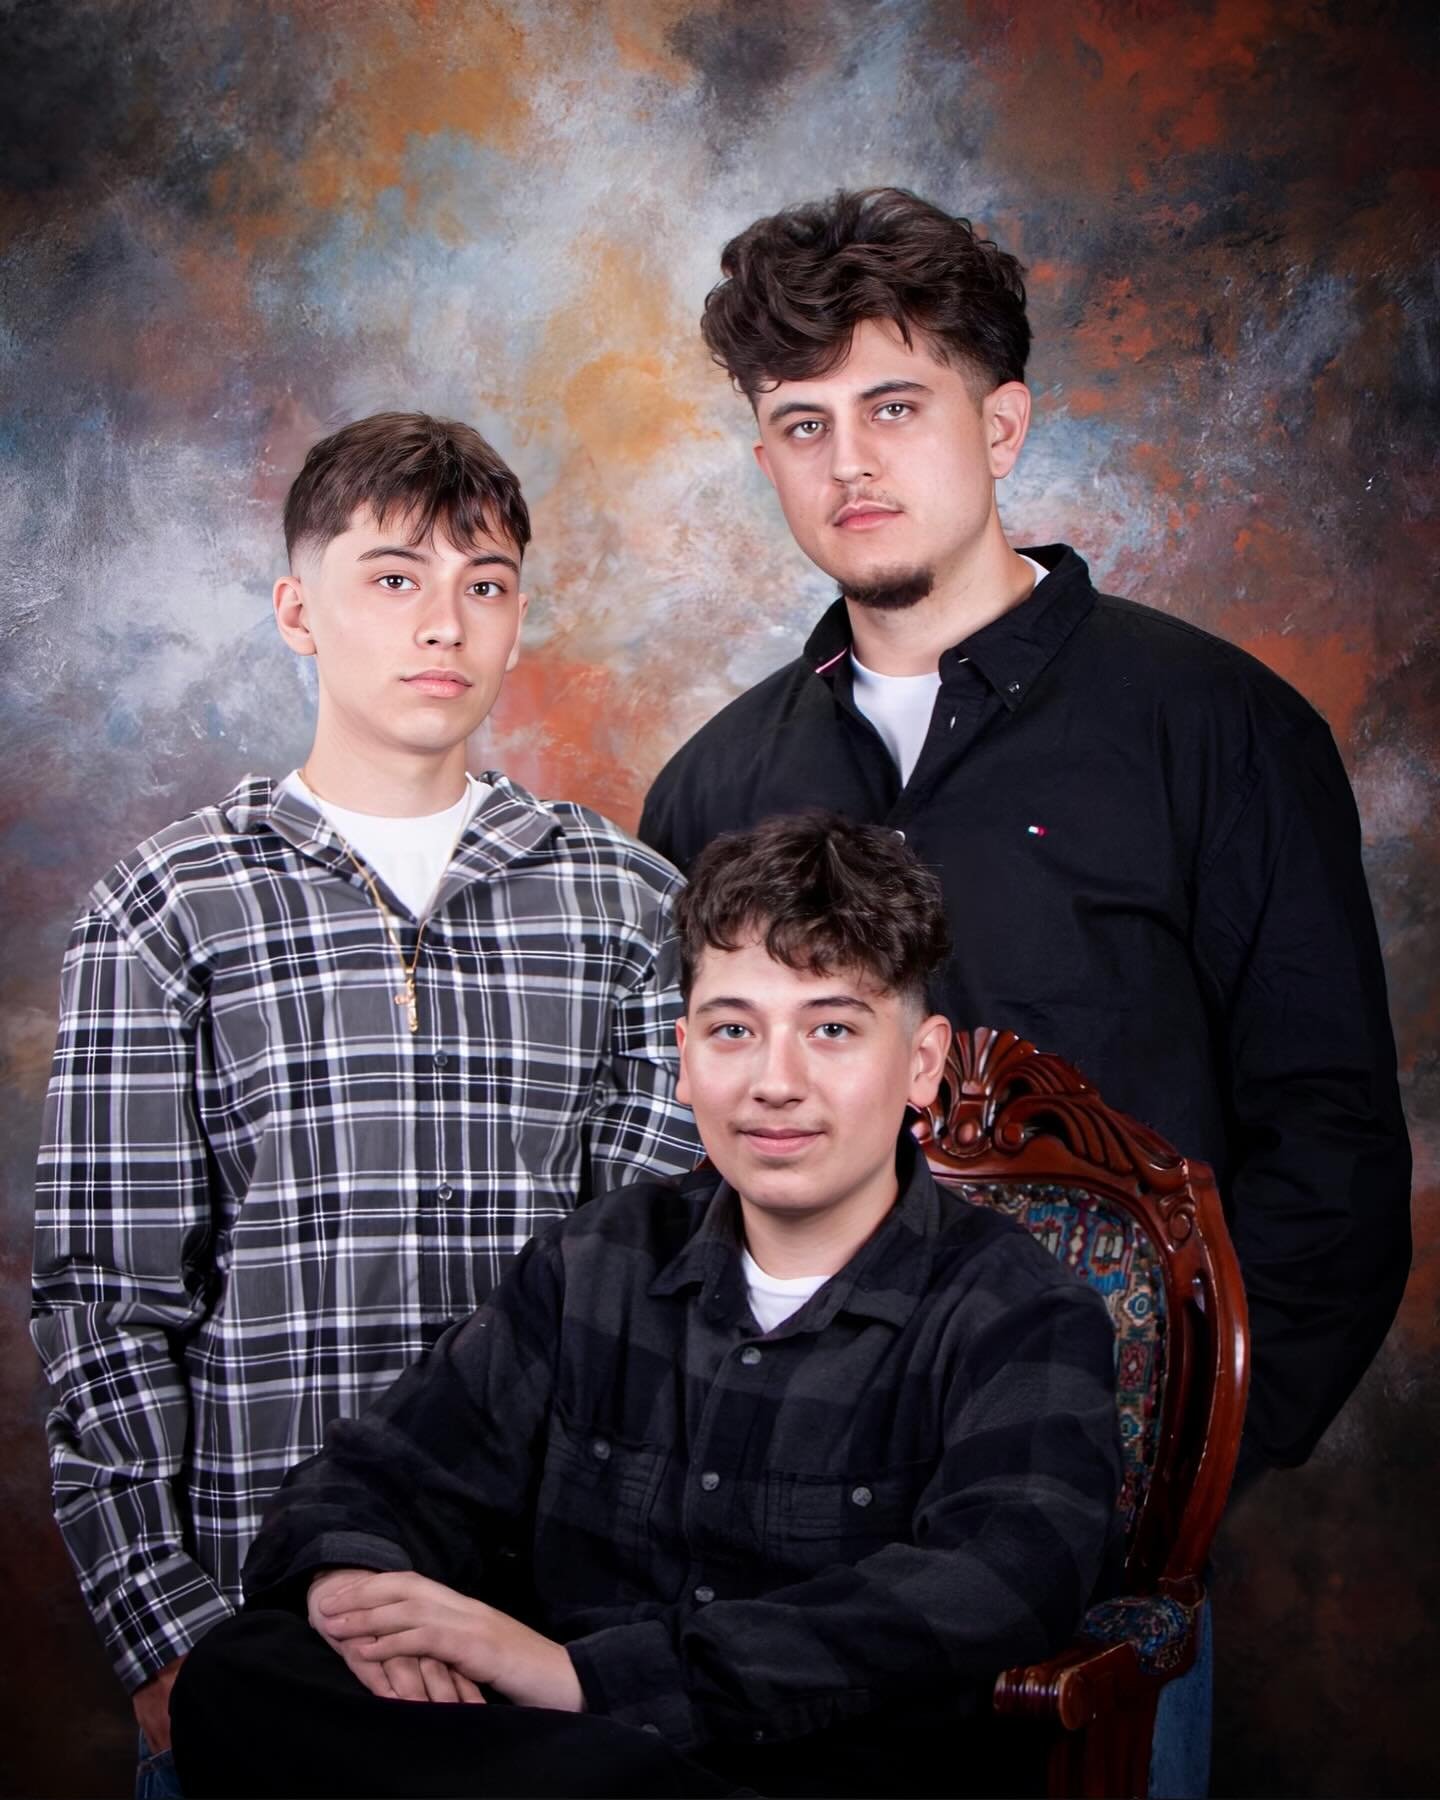 Brotherly love 🫶🏻

The best thing about memories is making them..

Visit our Studio from Monday to Friday from 11am to 6pm
Address: 1936 Saviers Rd Oxnard CA 93033
Phone: (805) 487-5154

Hablamos Espanol!

#familyportrait #photography #oxnardphotog